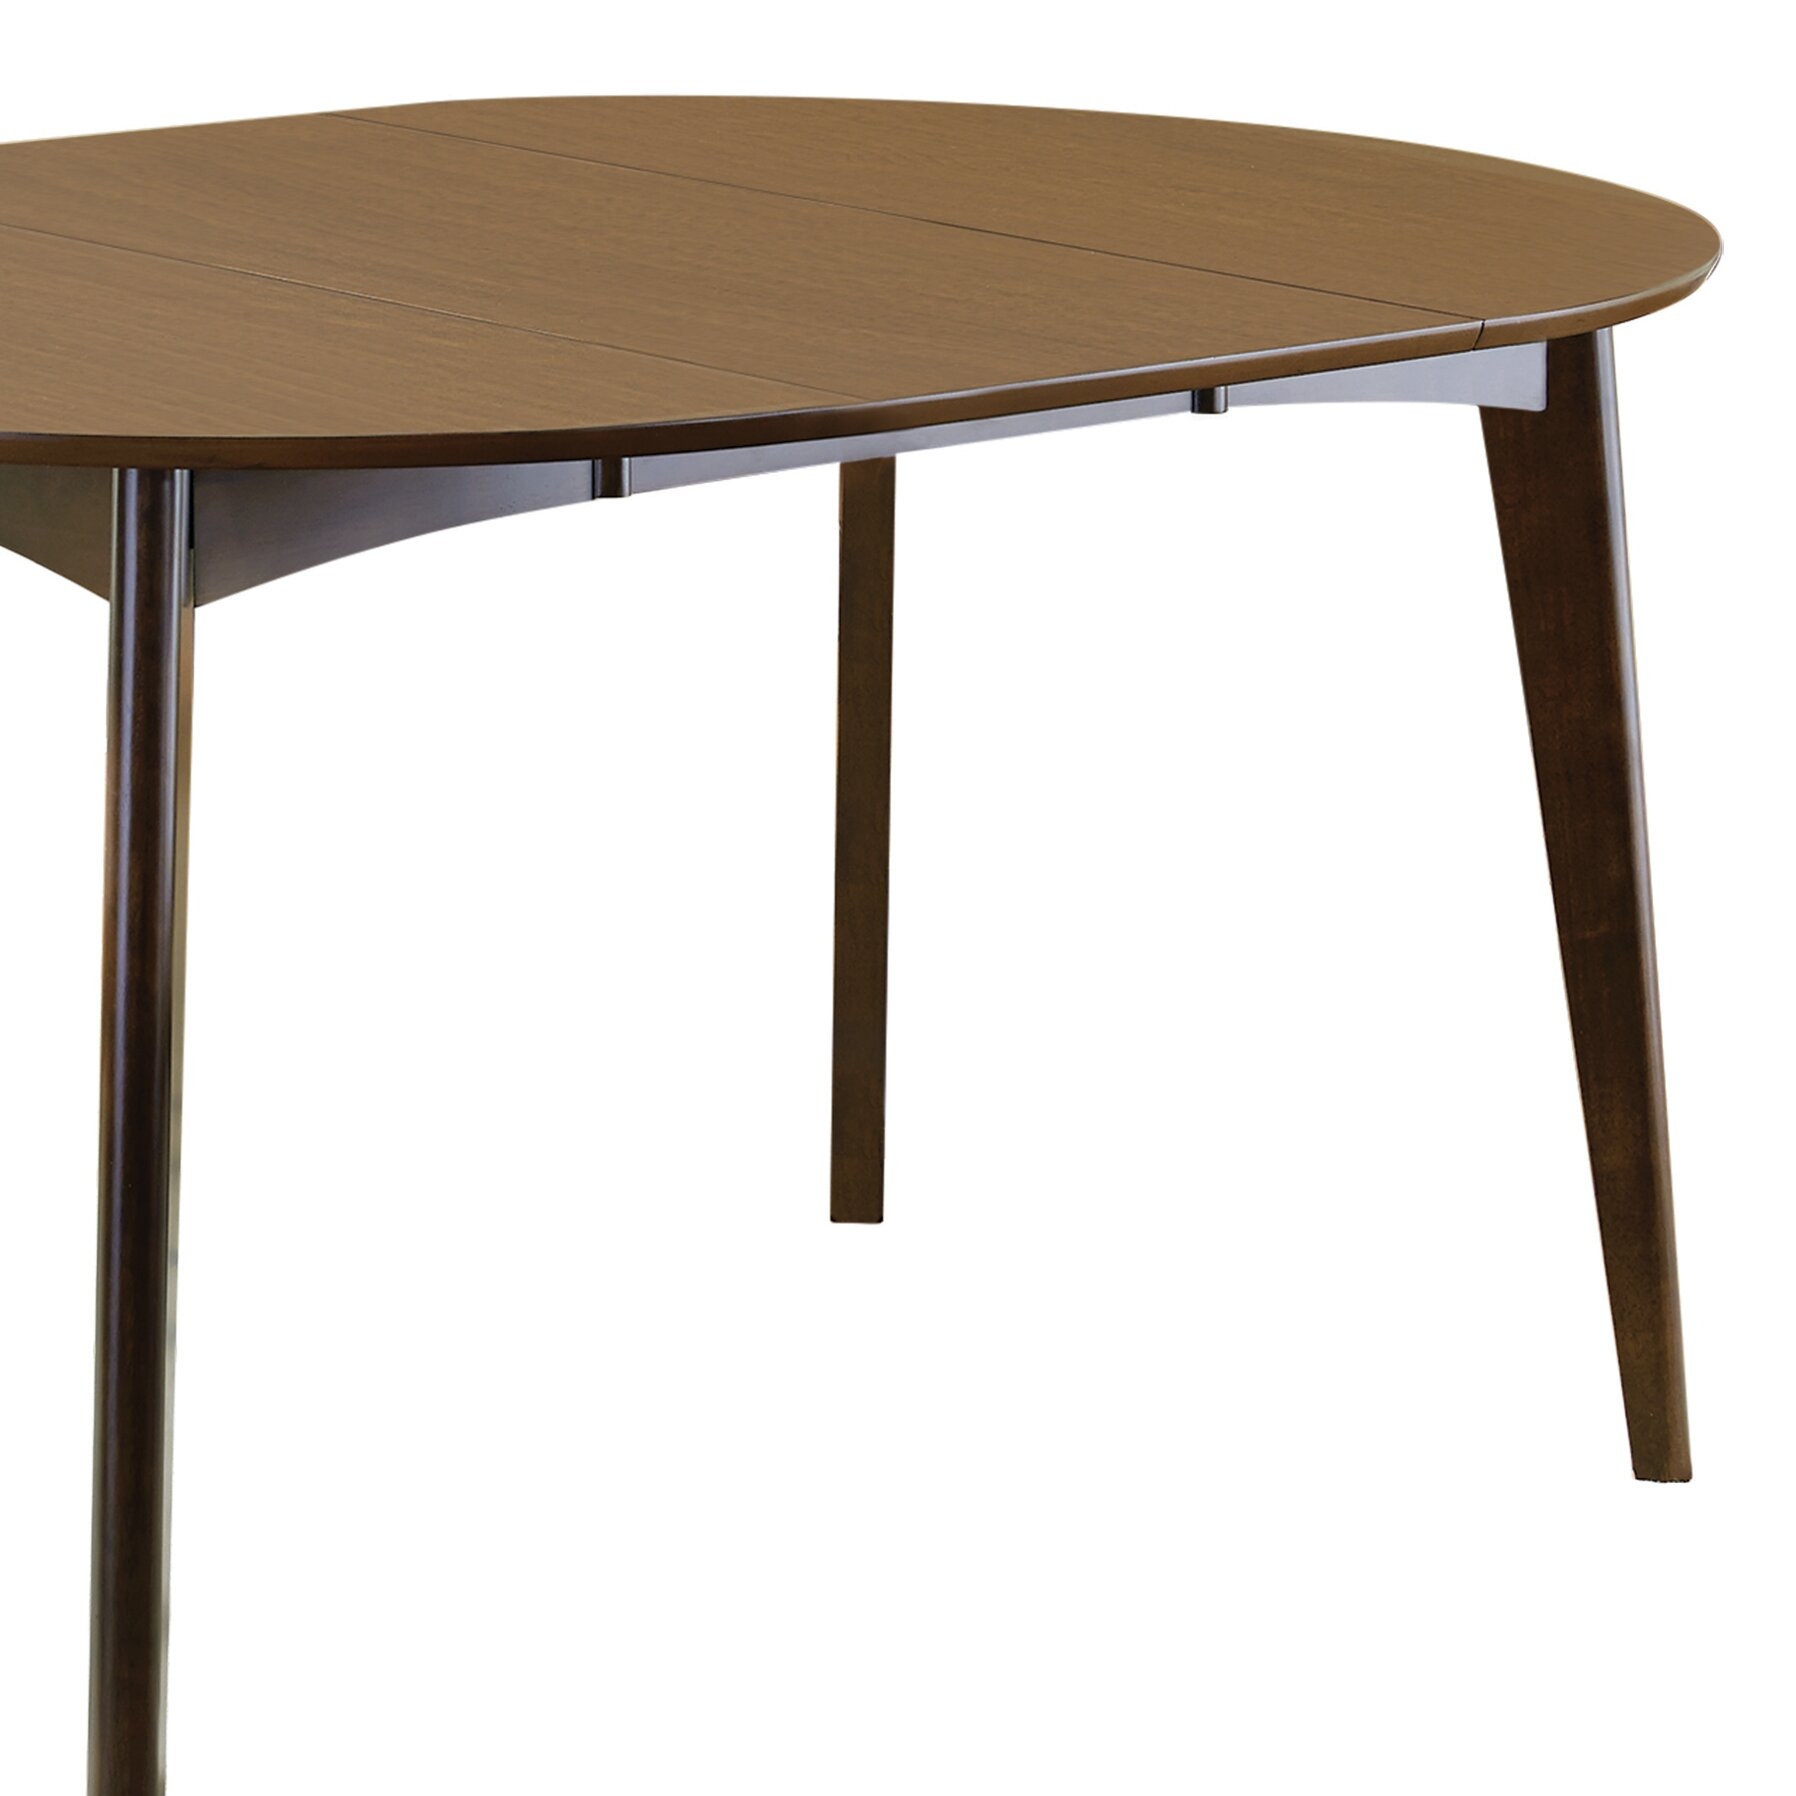 Lootens Dining Table - Image 2